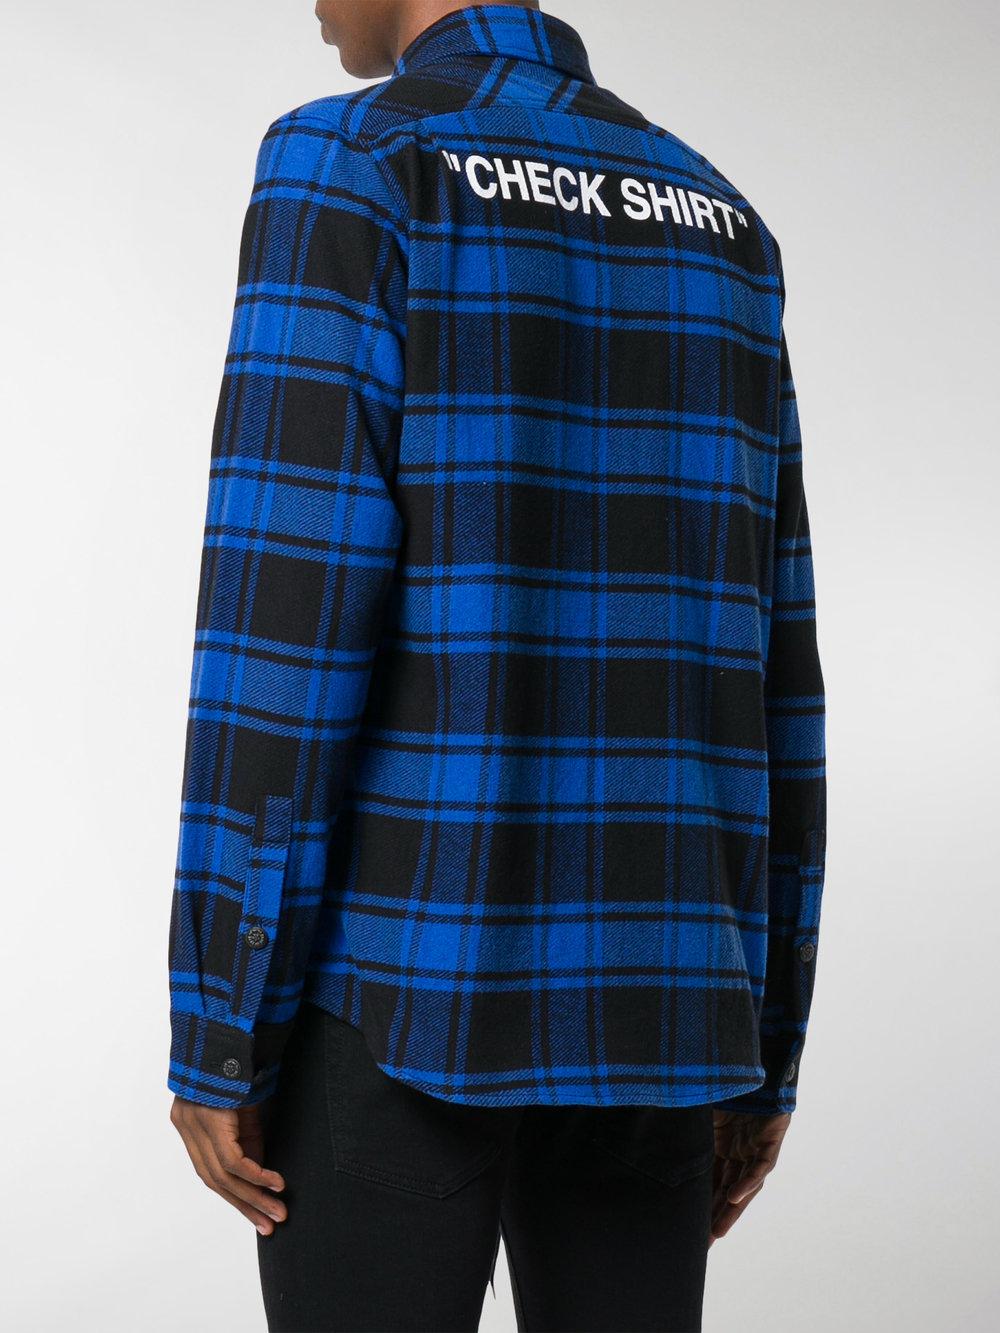 Off-White c/o Virgil Abloh Quote Flannel Shirt in Blue for Men - Lyst